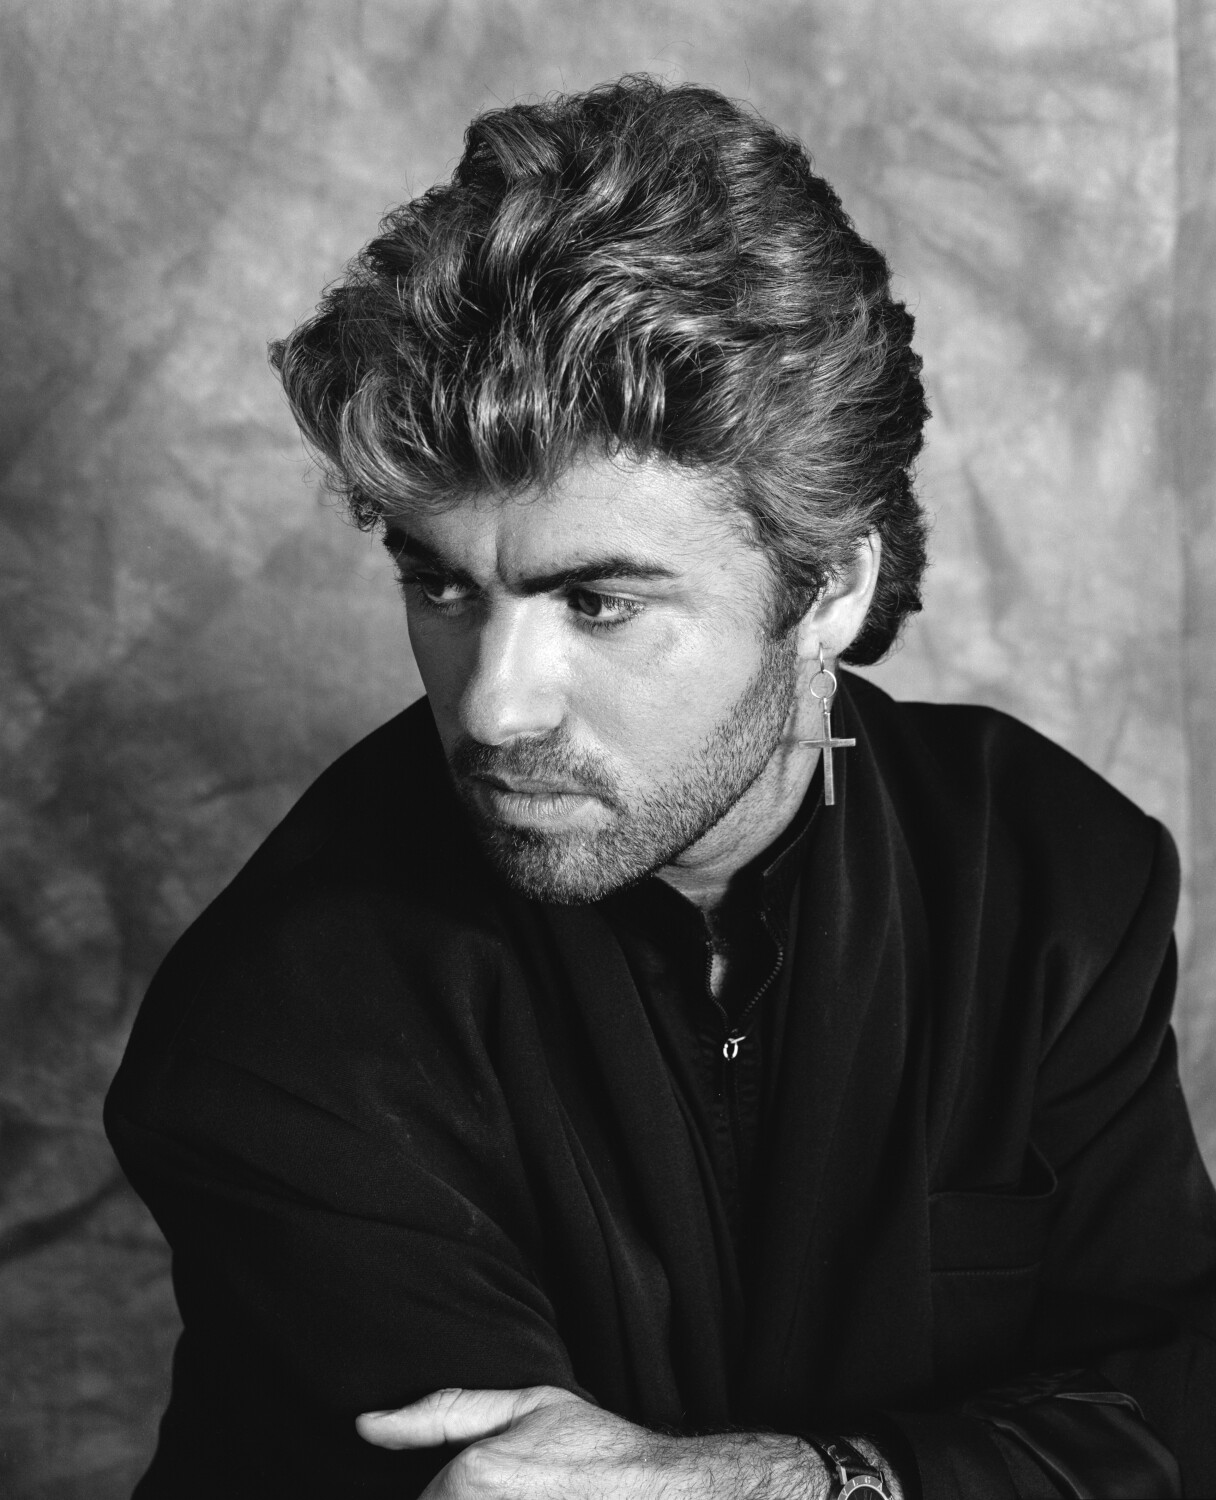 George Michael spent his career singing about freedom. But he never quite found it